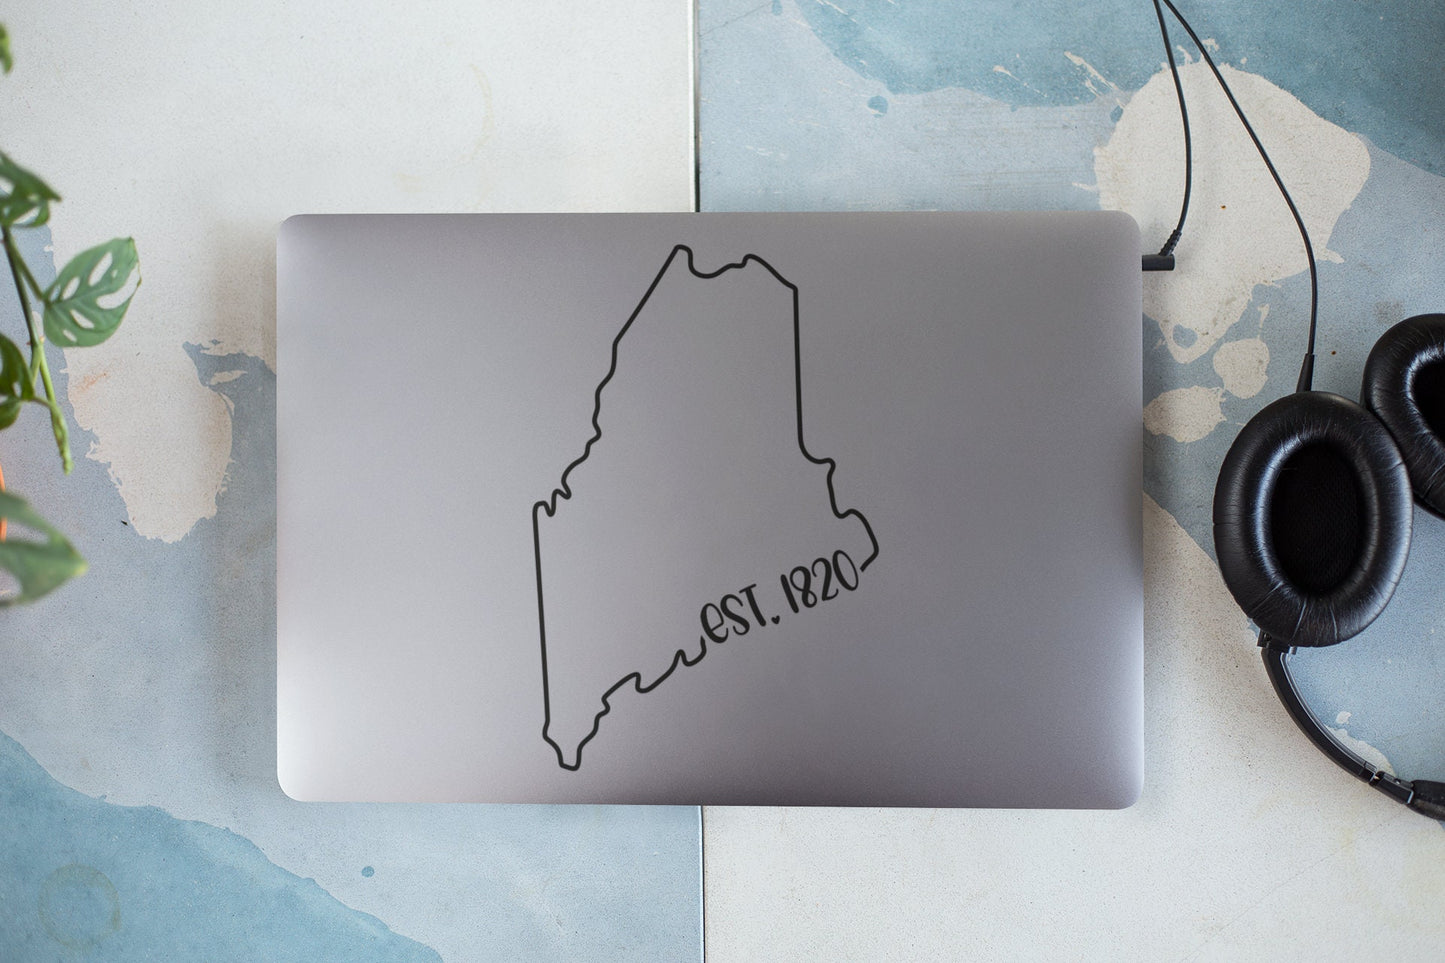 Maine EST. 1820 Decal - Many Colors & Sizes